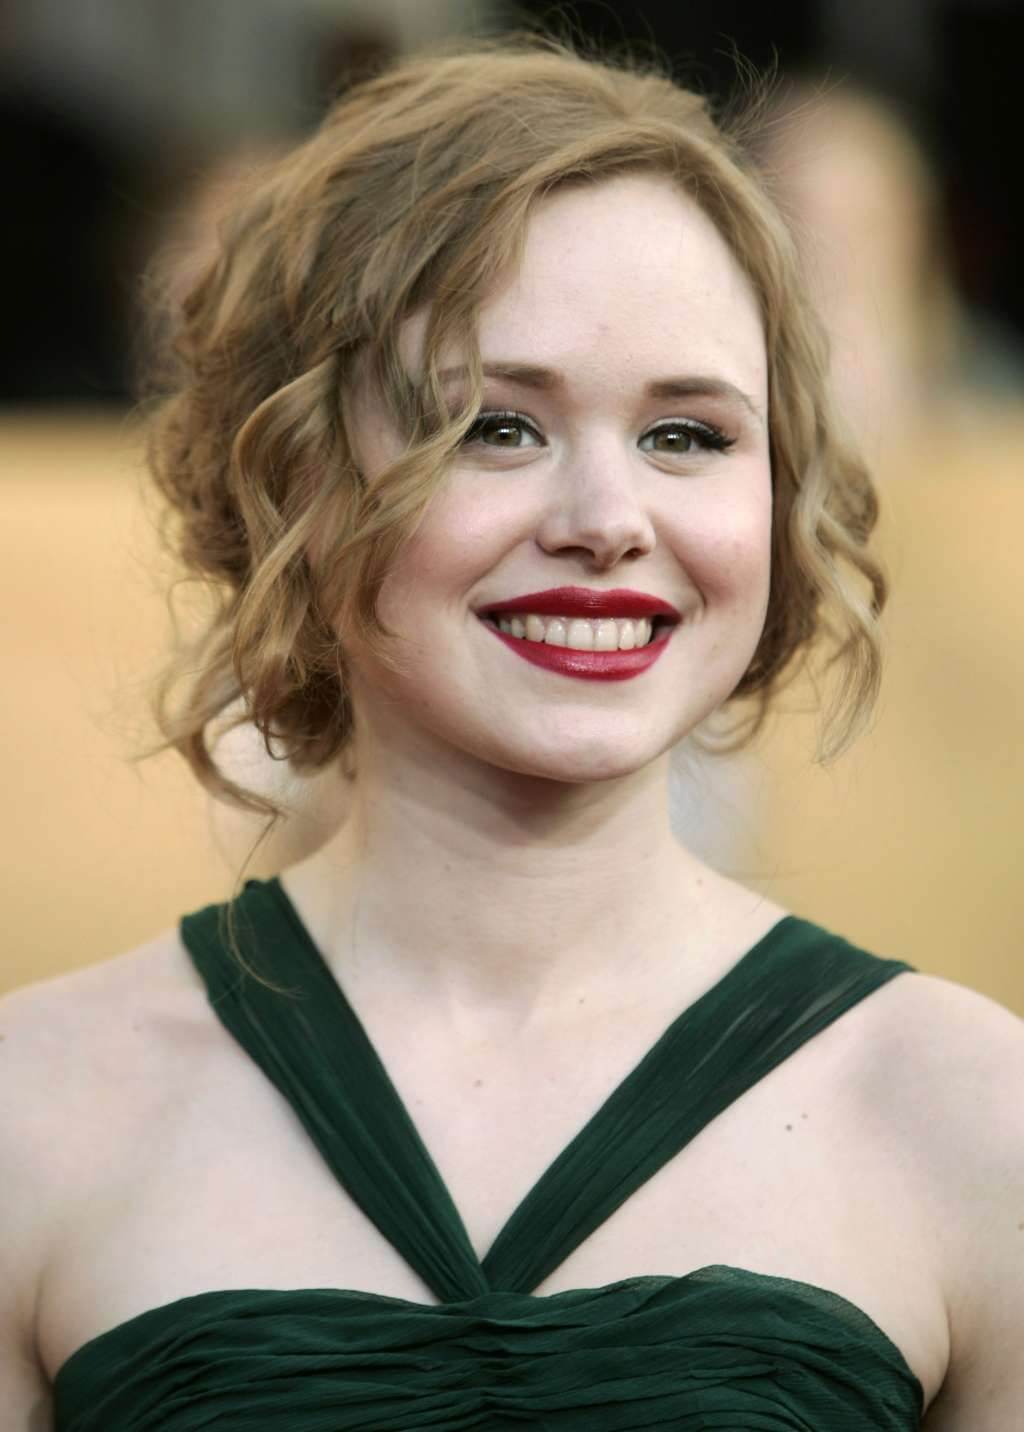 34 Alison Pill Nude Pictures Are Hard To Not Notice Her Beauty Best Of Comi...